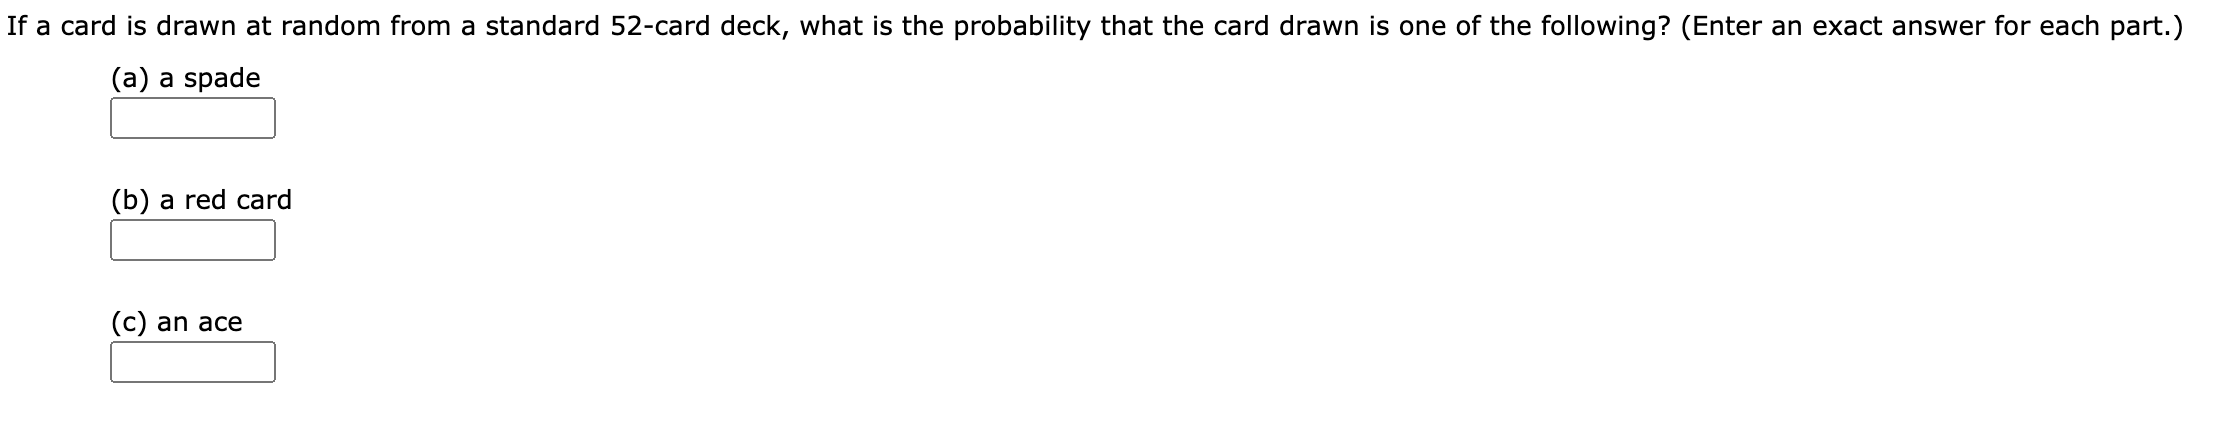 If a card is drawn at random from a standard 52-card deck, what is the probability that the card drawn is one of the following? (Enter an exact answer for each part.)
(a) a spade
(b) a red card
(c) an ace
